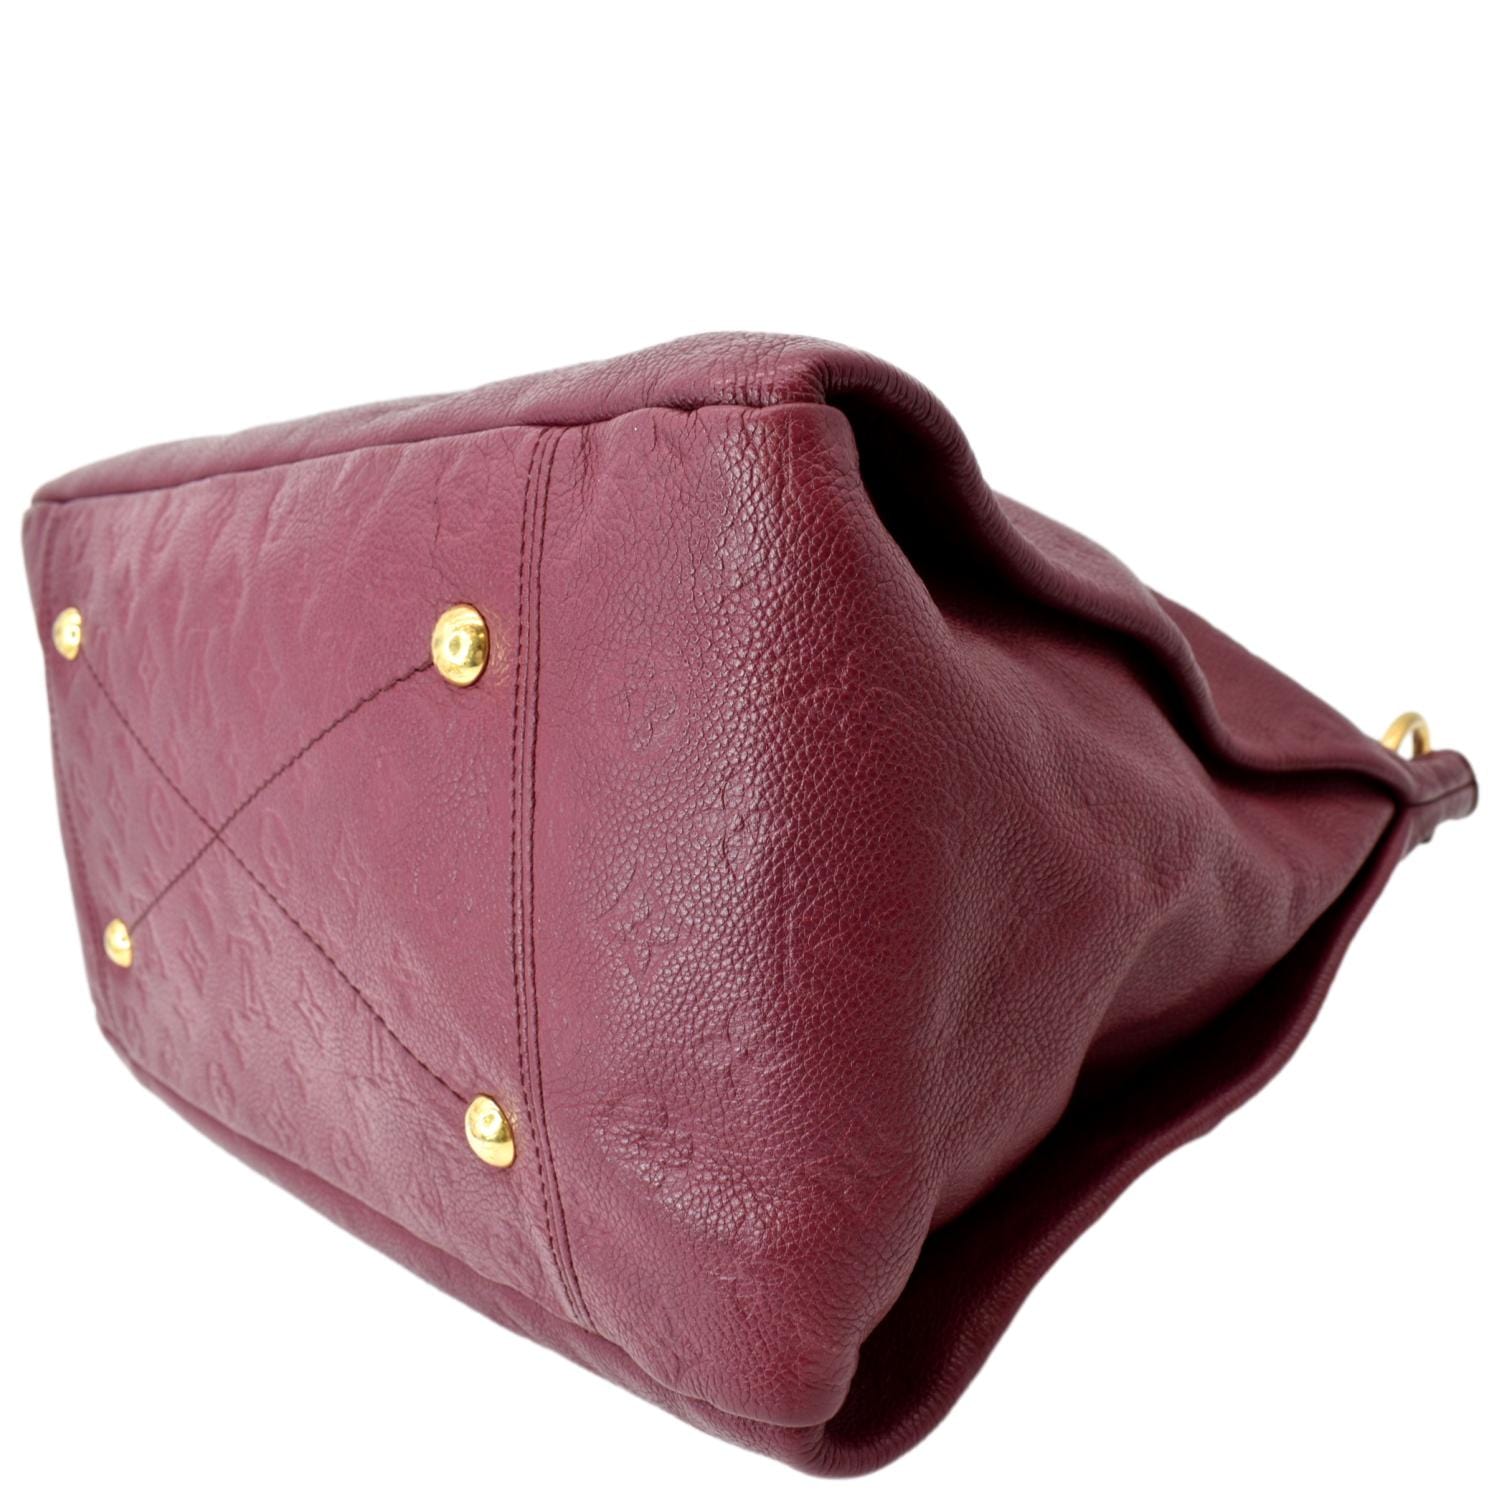 louis vuitton go handbag in burgundy quilted leather - 15% OFF